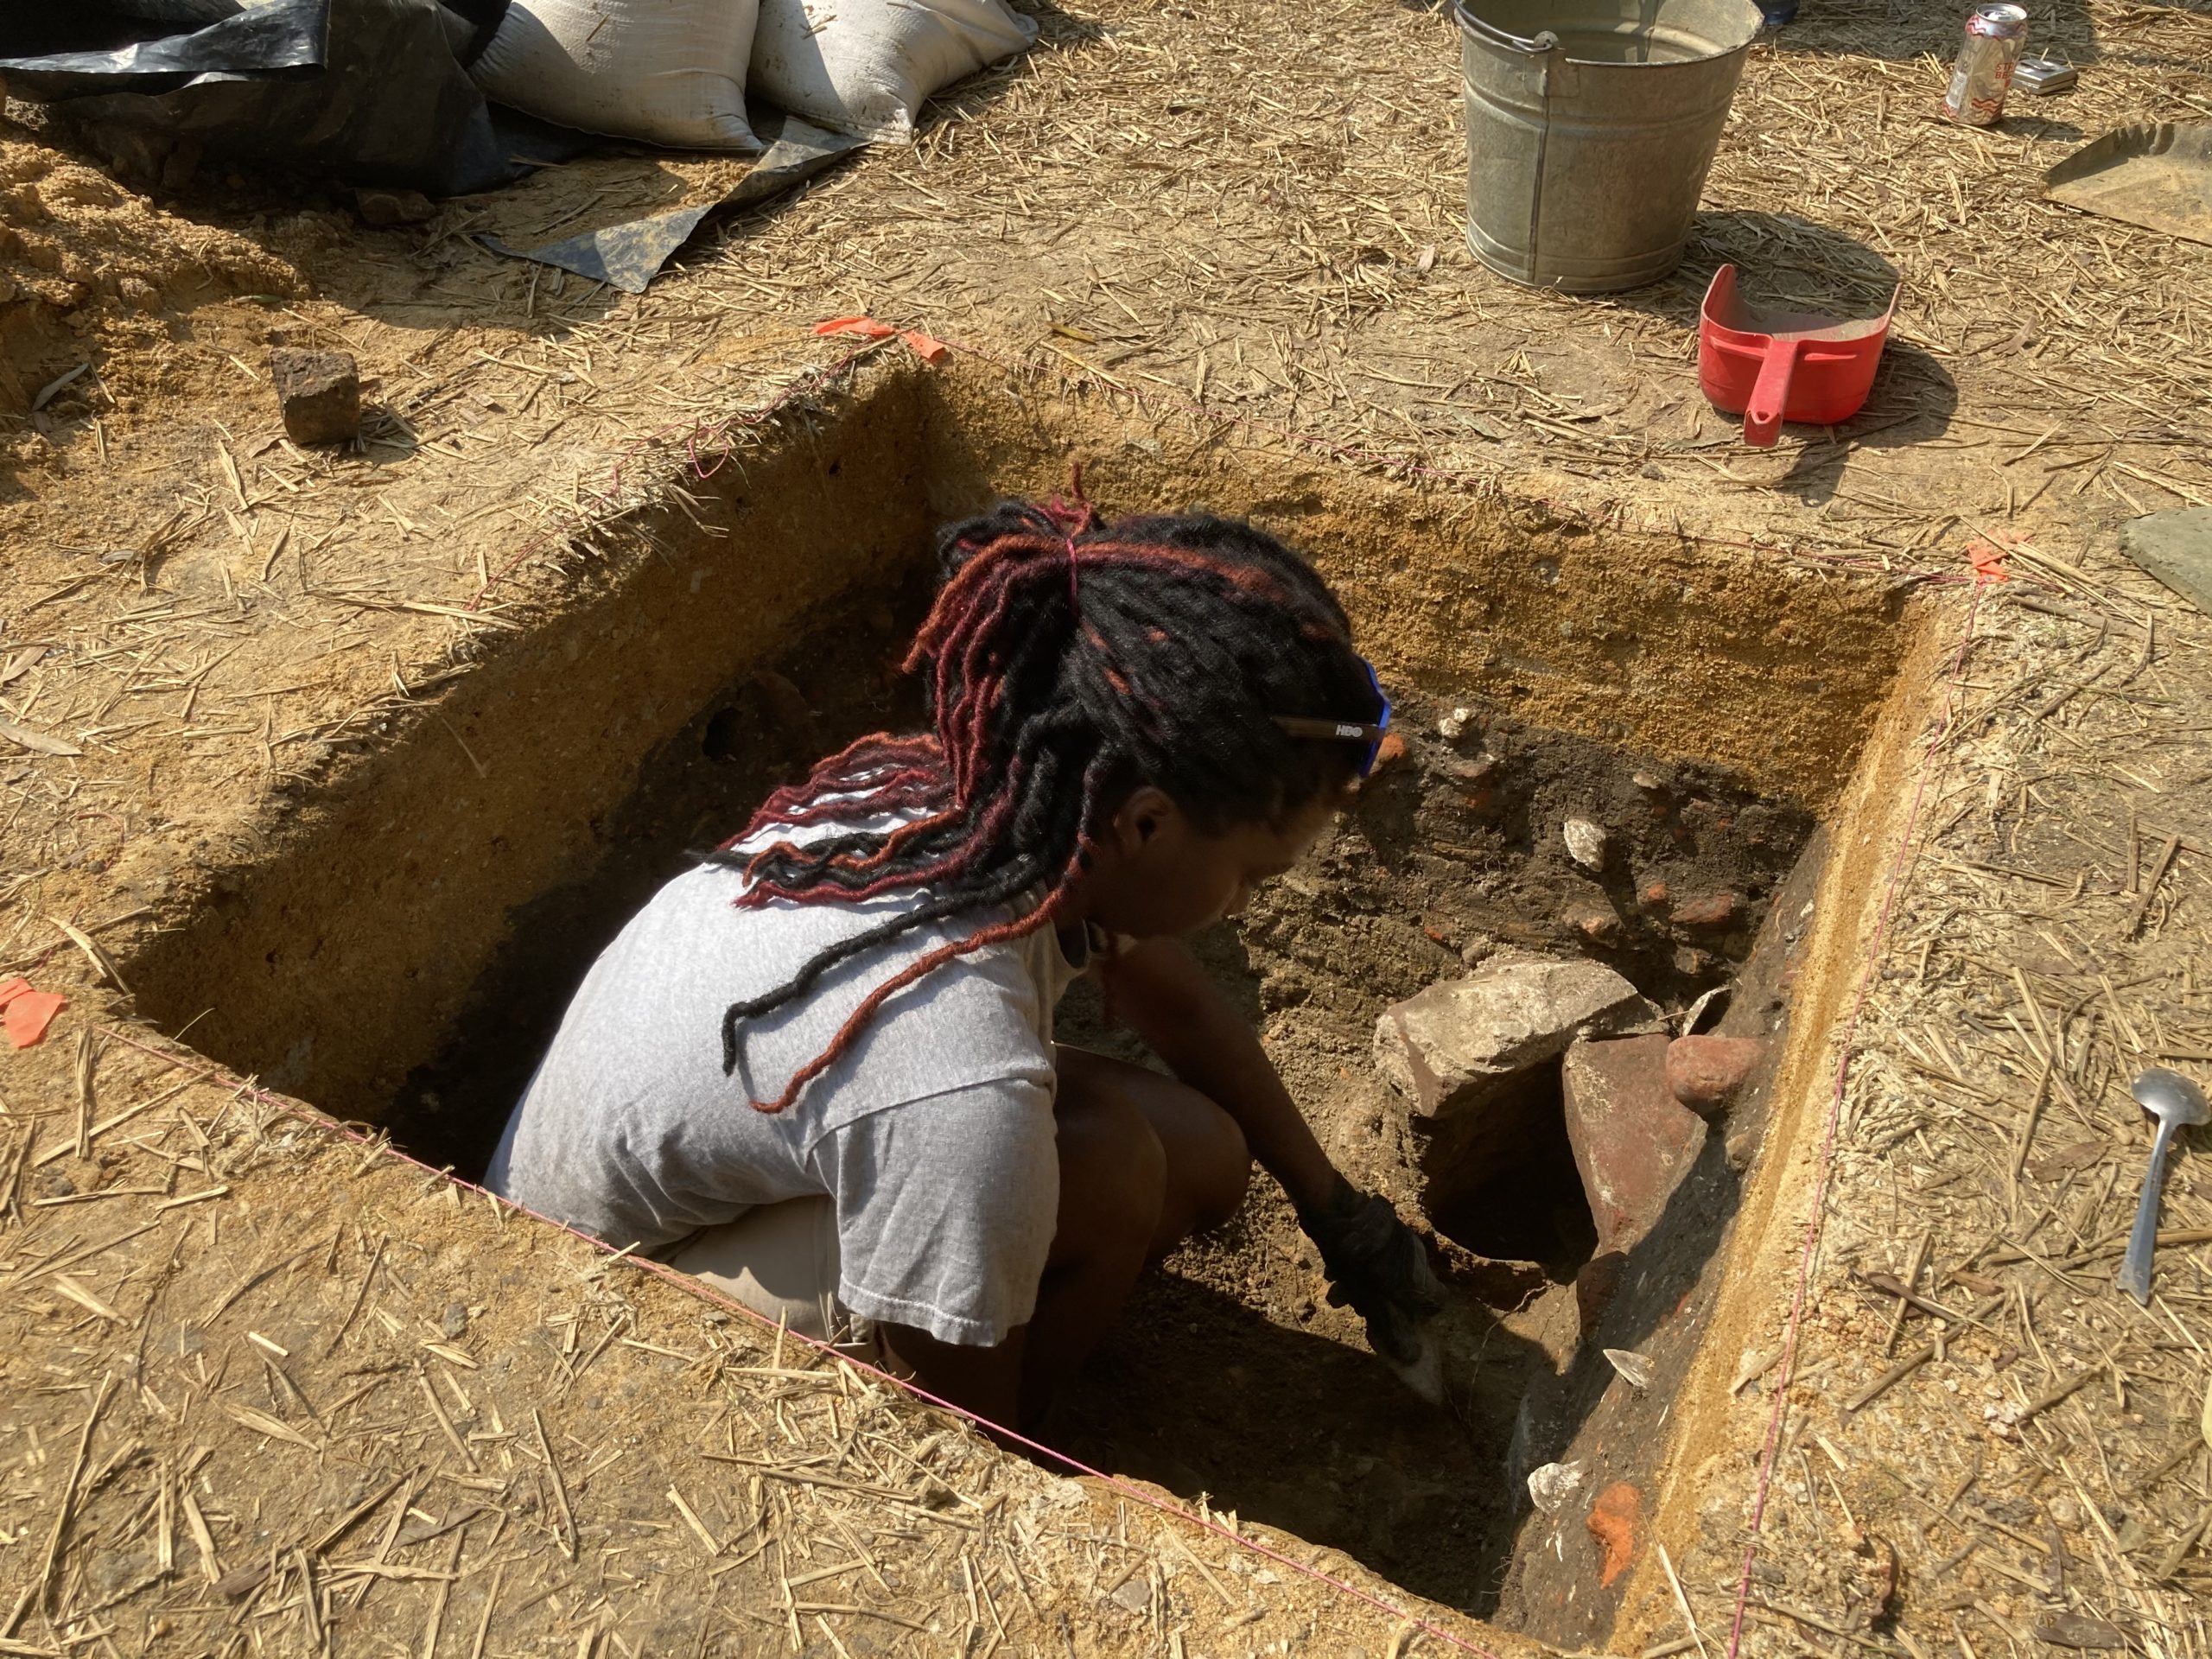 DéShondra Dandridge excavated a smaller trench during the project's first phase. (Image: Colonial Williamsburg)